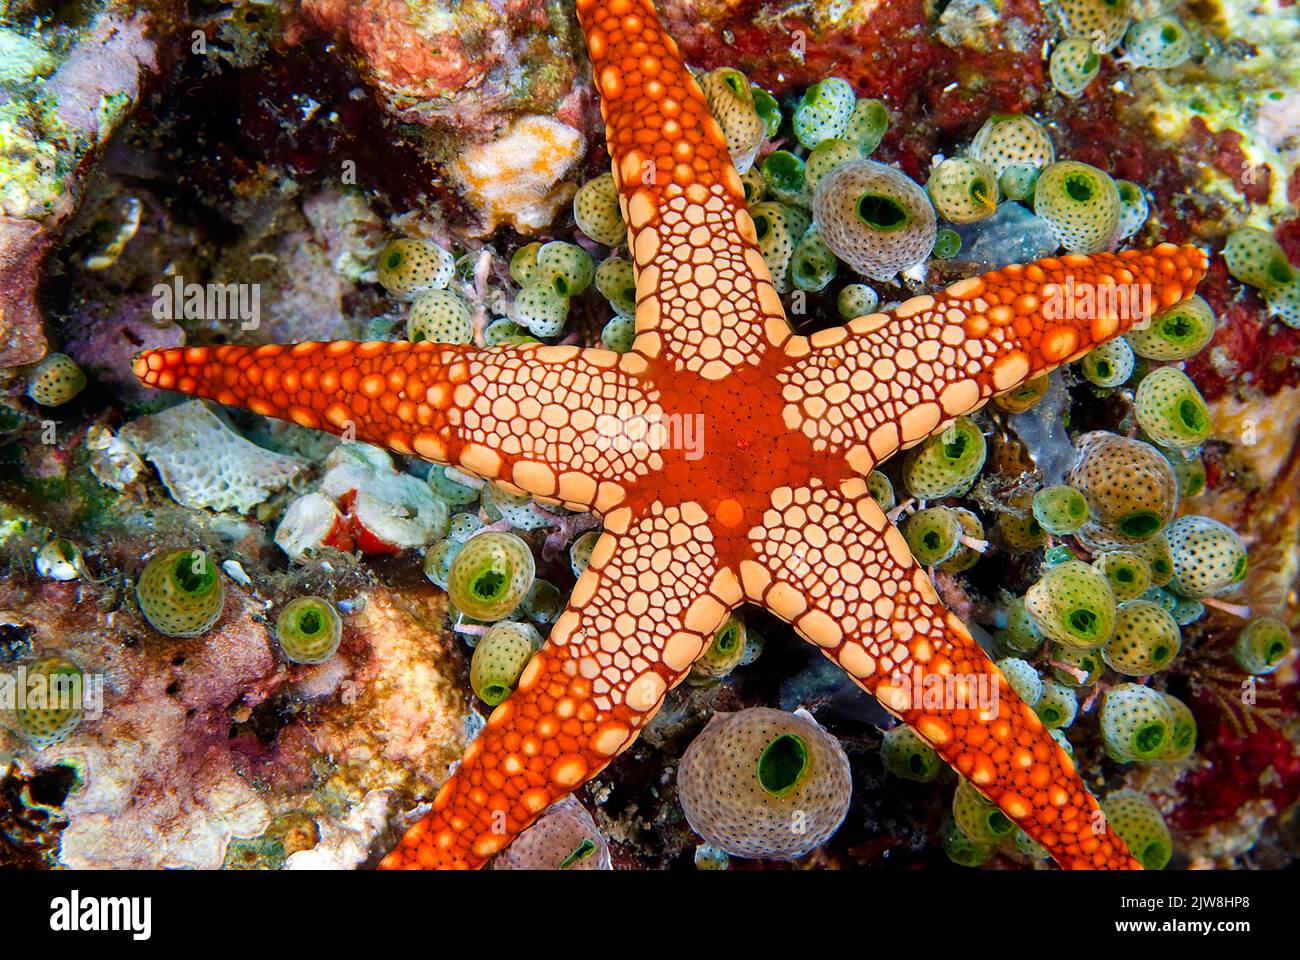 Necklase Sea Star (Fromia monilis) and  Green Urn Sea Squirts or Green Barrel Sea Squirts (Didemnum molle), Maldives, Indian Ocean, Asia Stock Photo